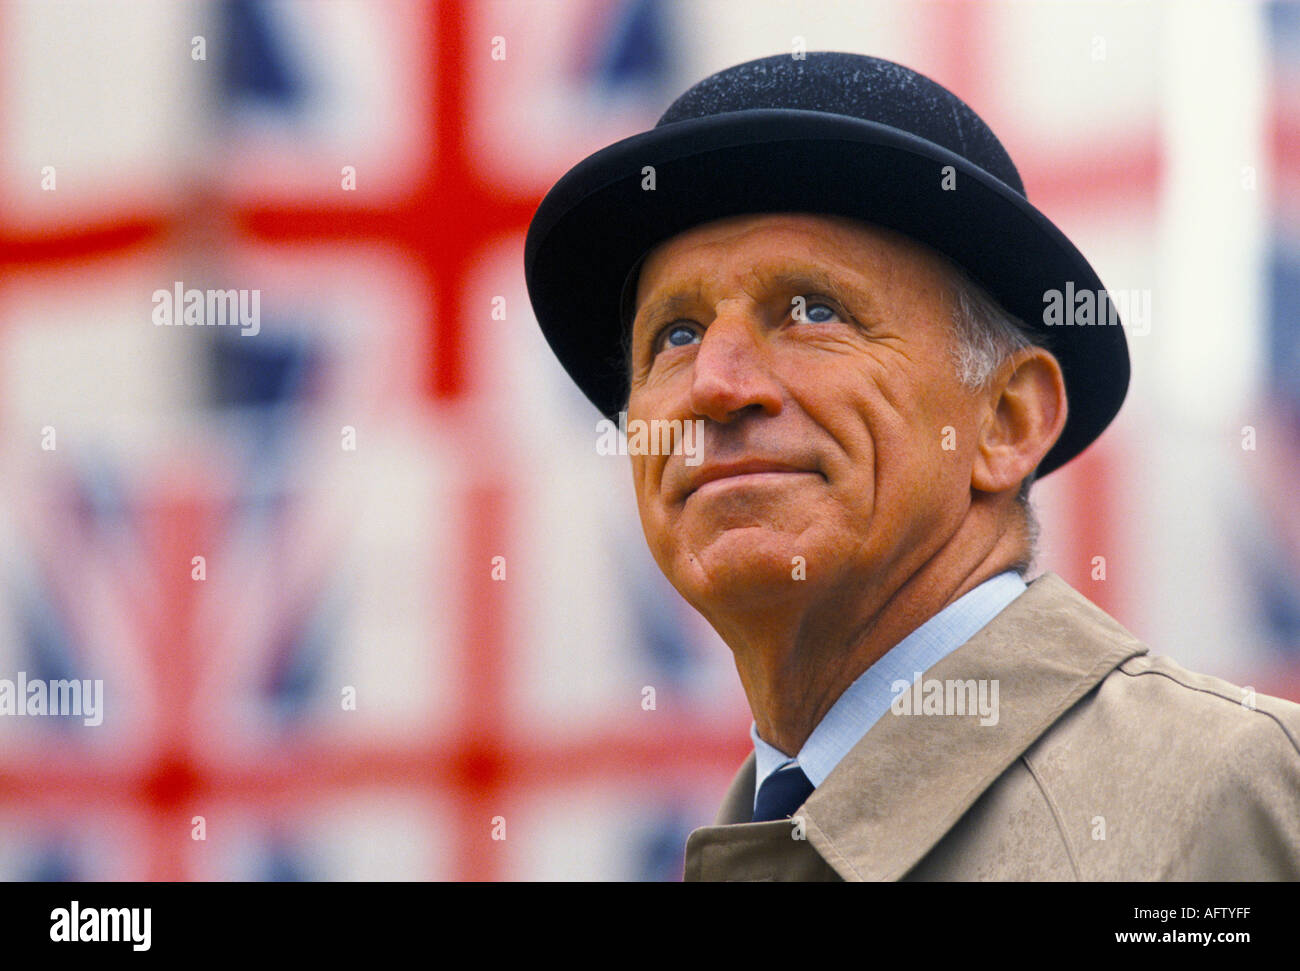 Bowler hat at the Lord Mayor of London annual Show. Union Jack flags, 1990s  UK HOMER SYKES Stock Photo